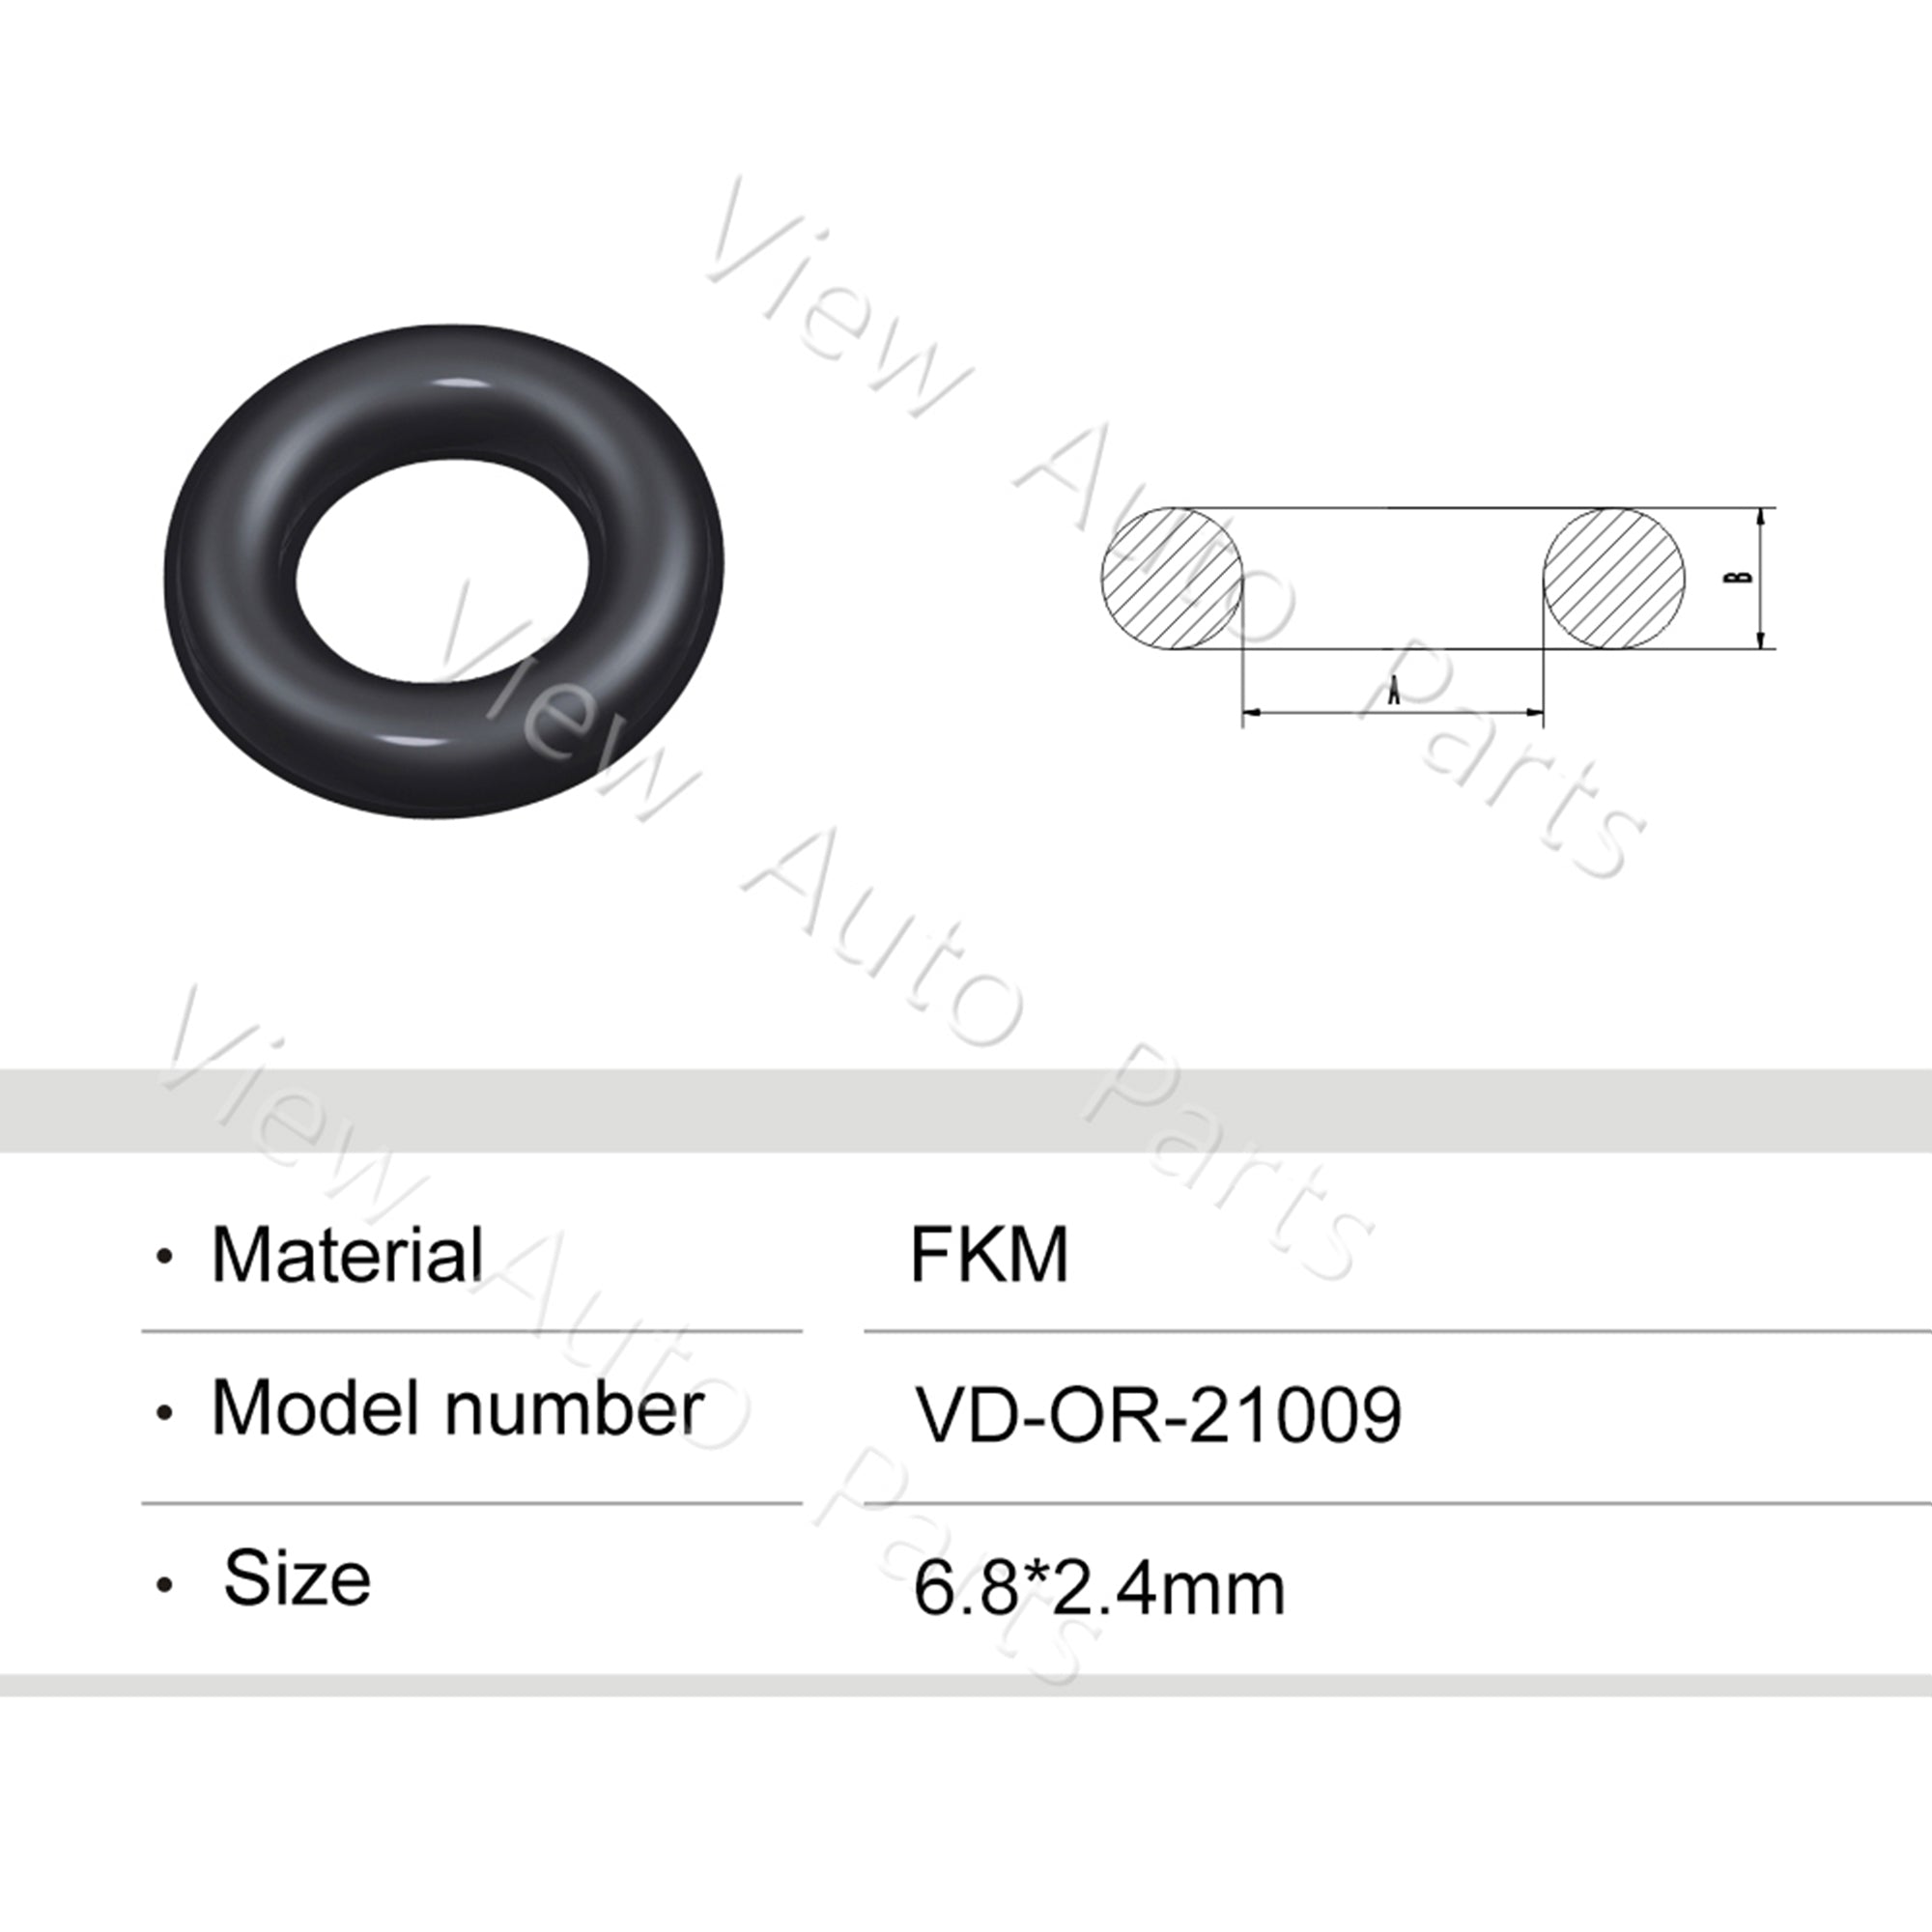 Fuel Injector Rubber Seal Orings for Lexus GS350 GS450h IS350 Fuel Injector Repair Kits FKM& Rubber Heat Resistant, Size: 6.8*2.4mm OR-21009